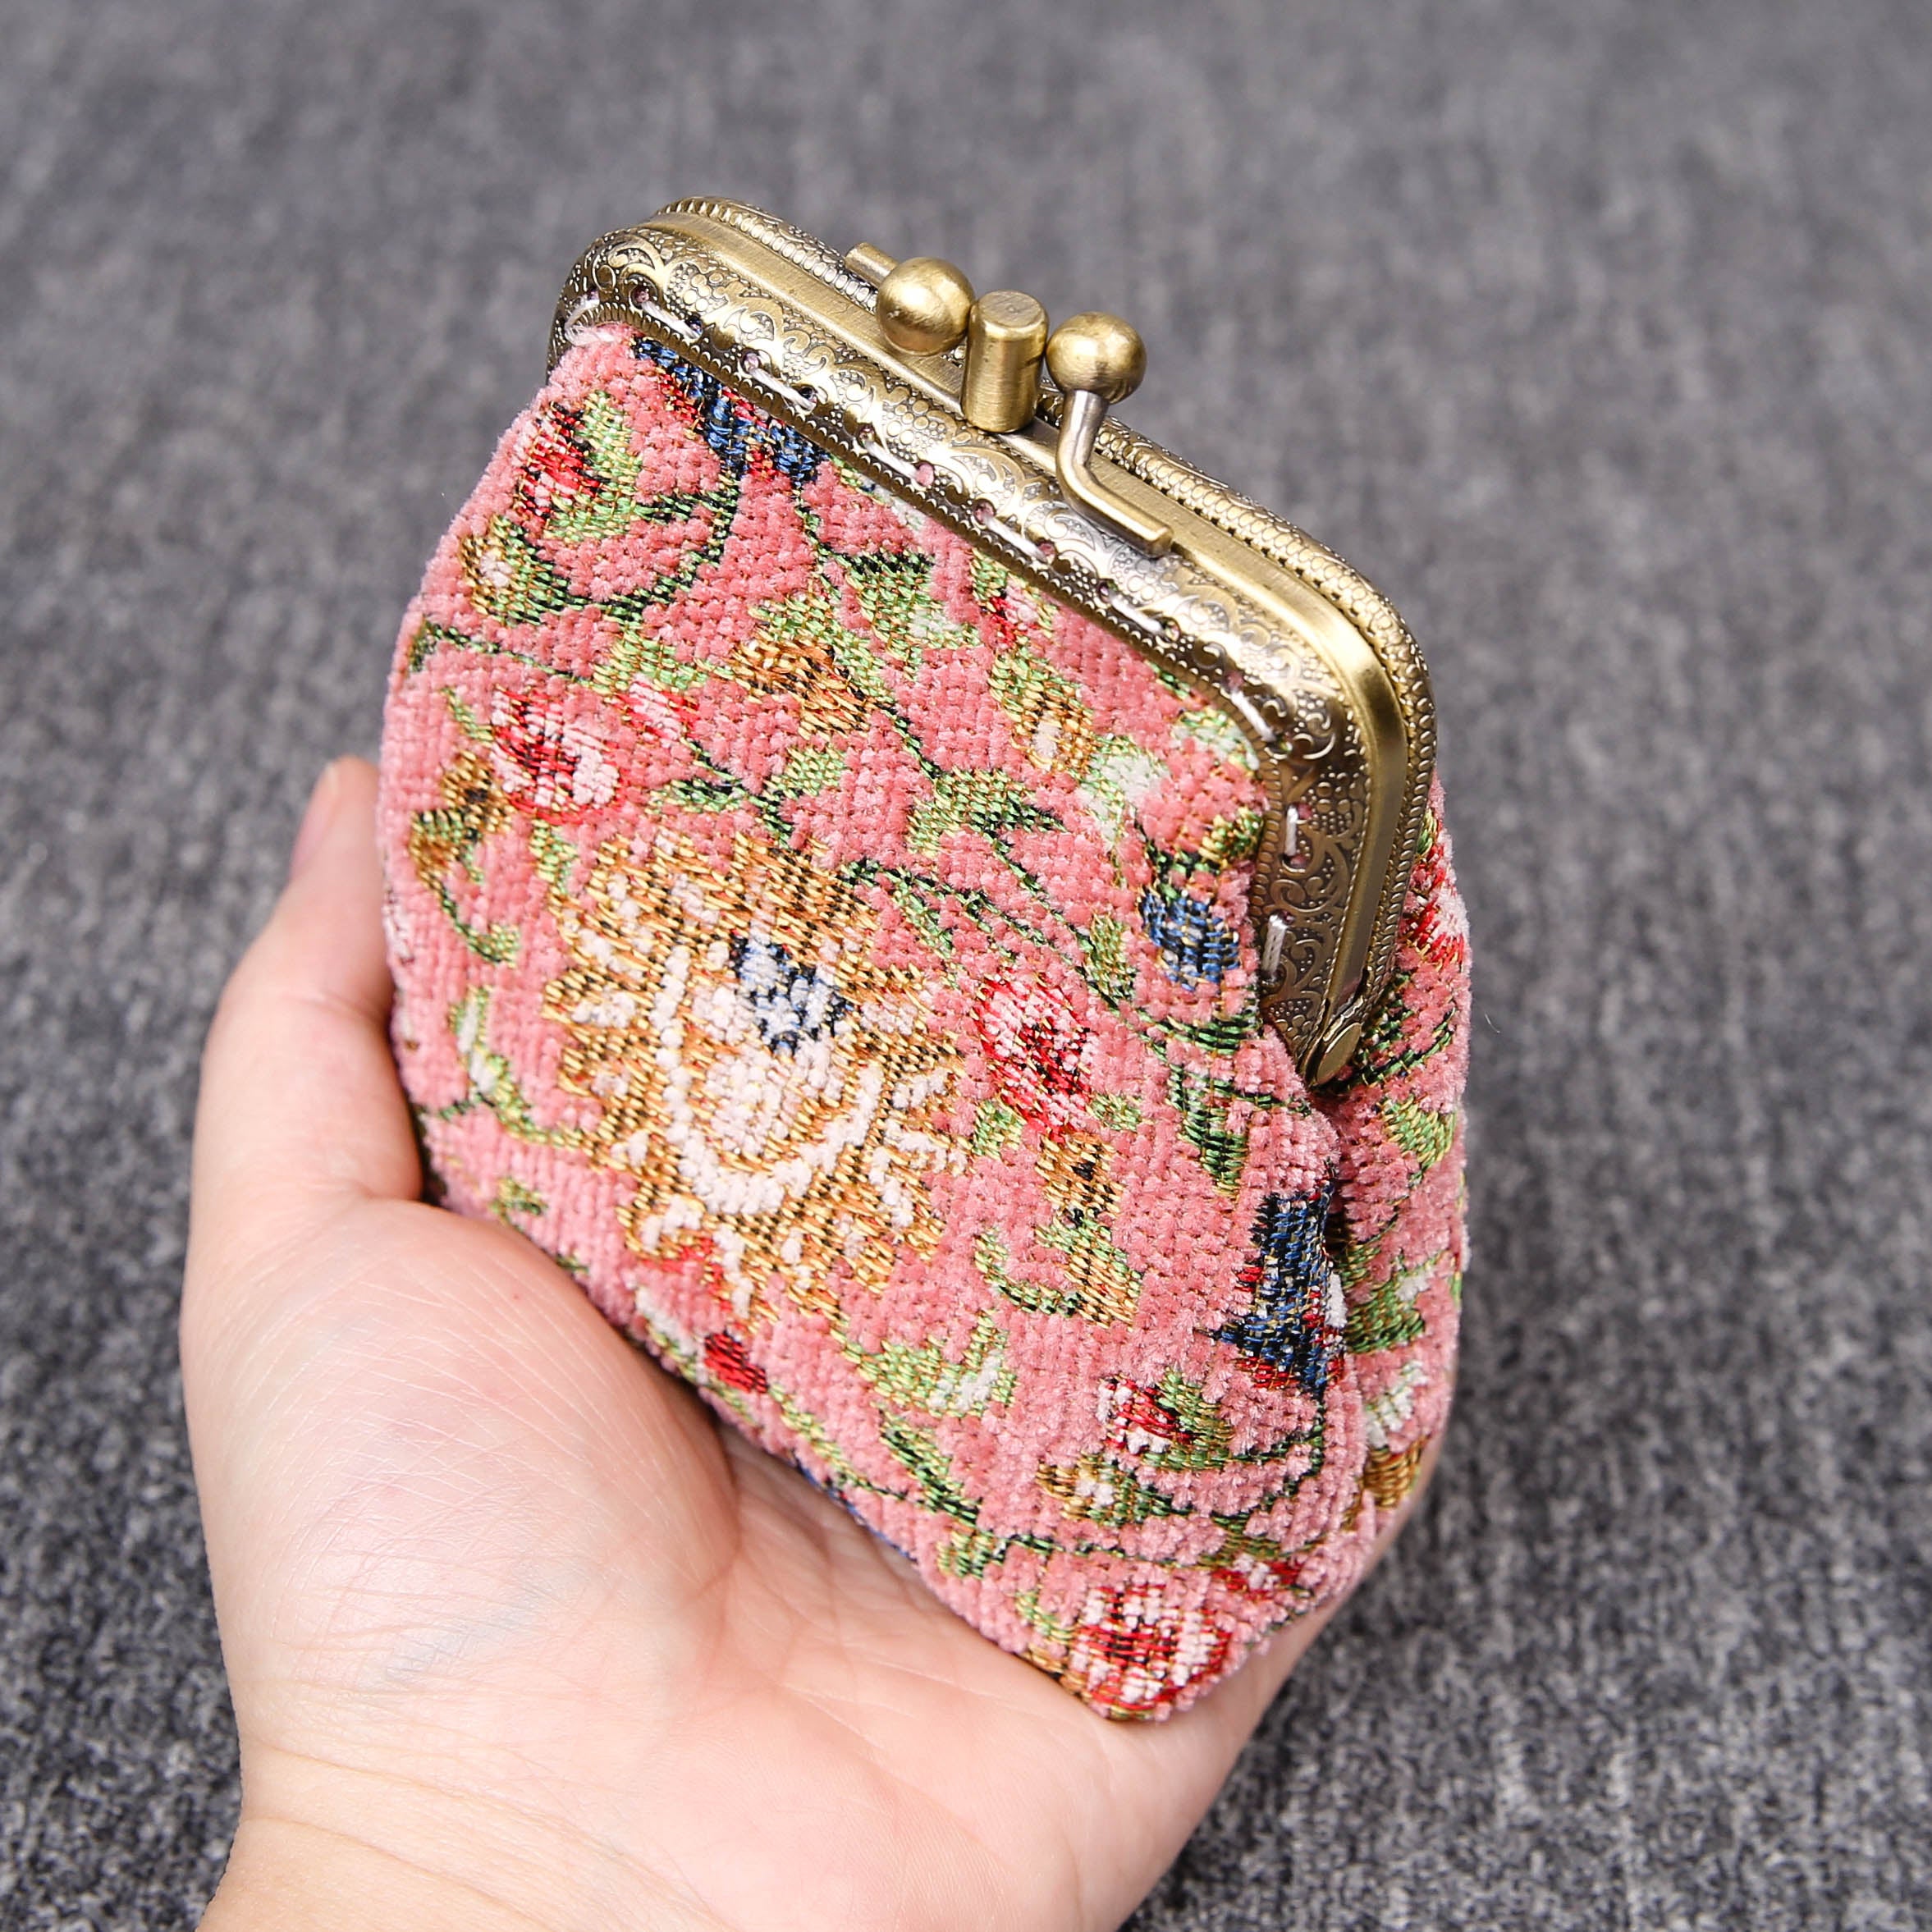 Small Change Purse Real Leather Lovely Female Coin Bag Double Zipper New Coin  Purse Pink Mini Foreign Trade Change Bag Coin Purse Wallet From Flower_bud,  $13.57 | DHgate.Com